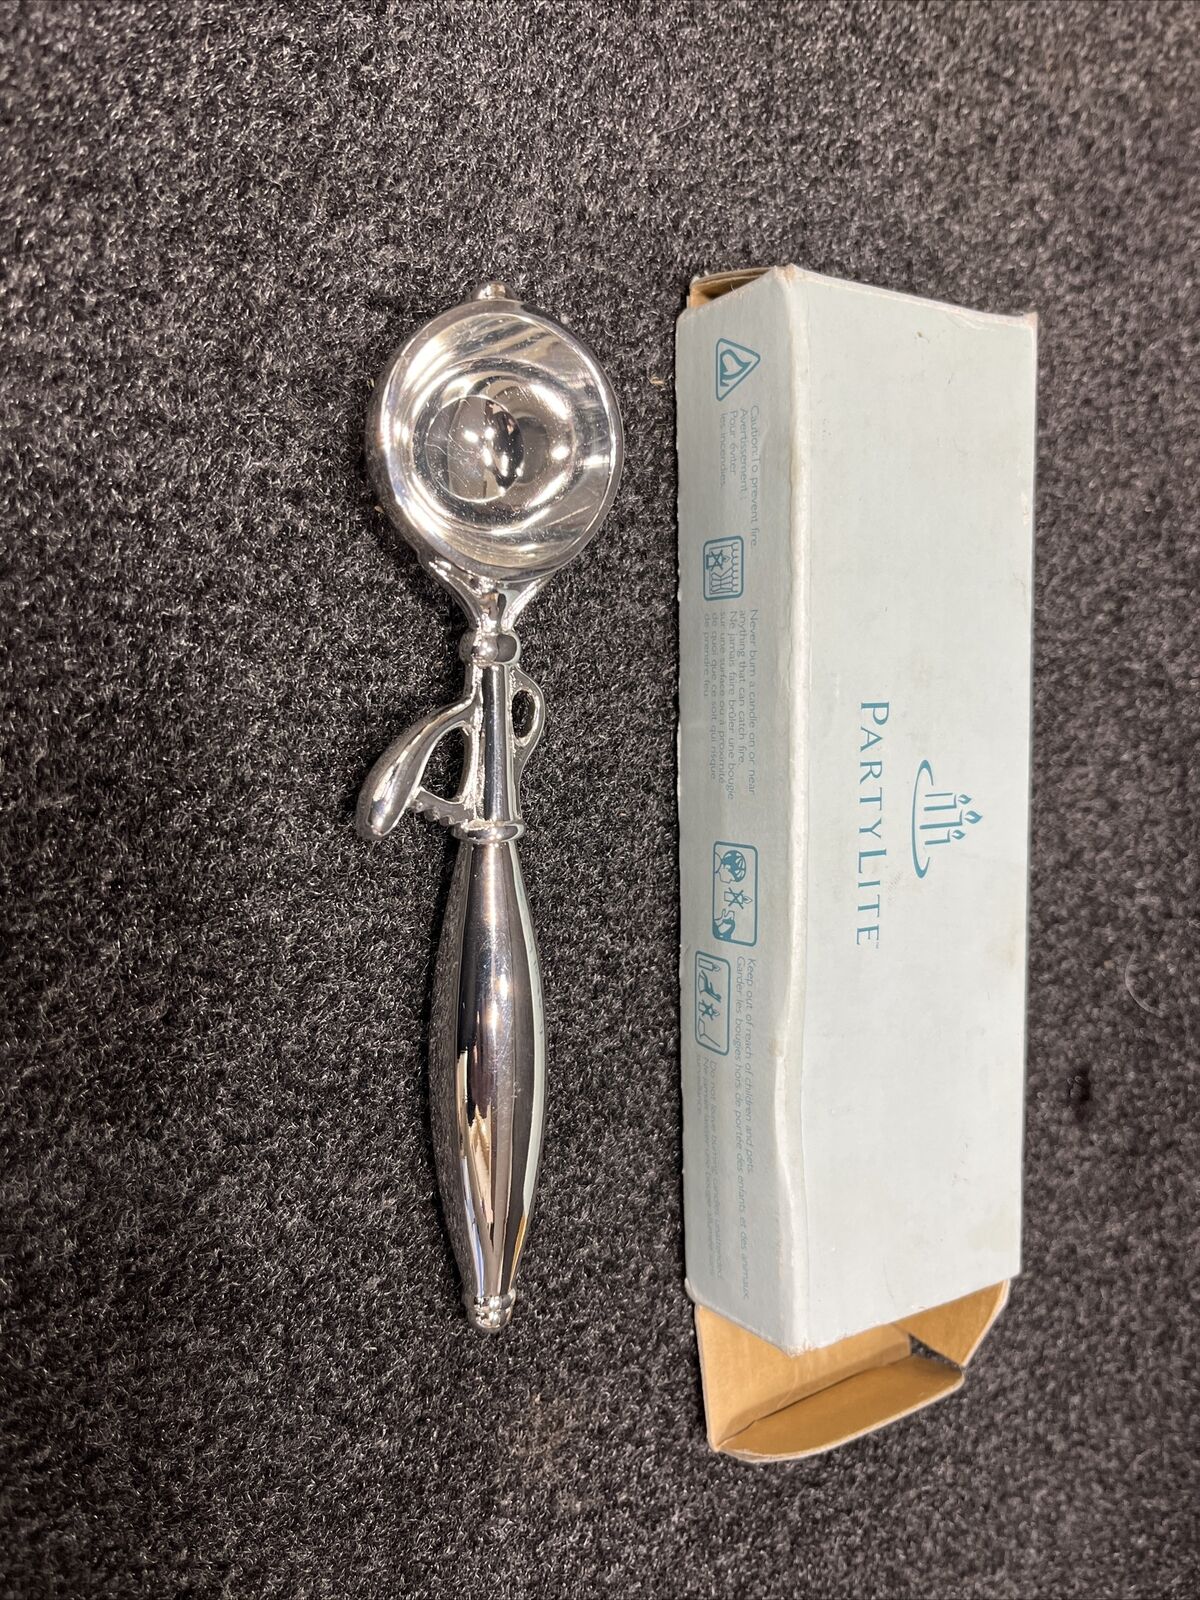 PartyLite Chrome Colored ICE CREAM SCOOP Candle Snuffer P7625 With Original Box